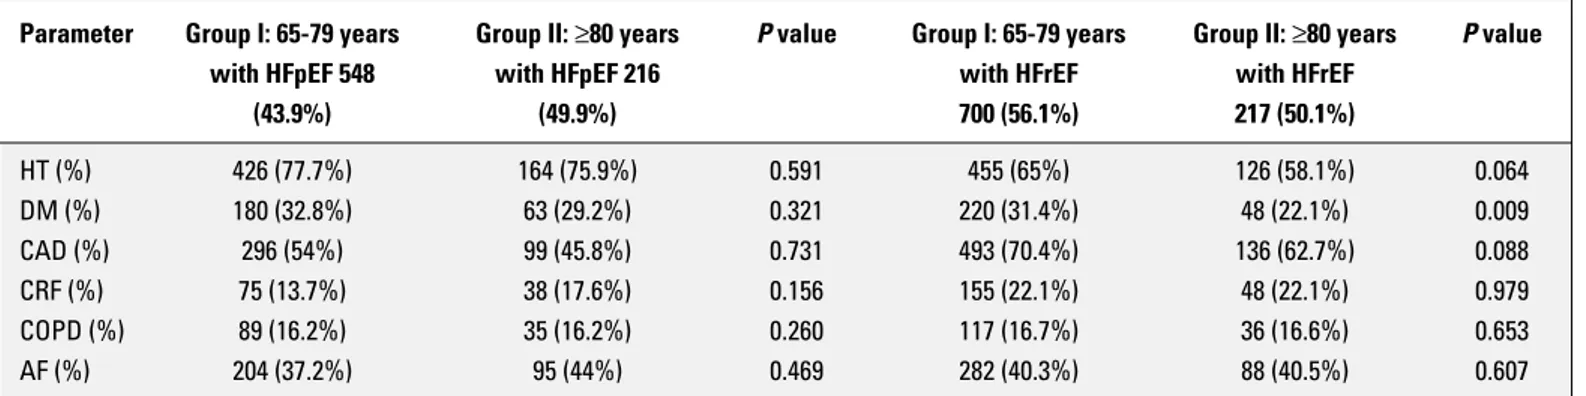 Table 4. Comparison of clinical characteristics of very elderly and the youngers with HFpEF and HFrEF